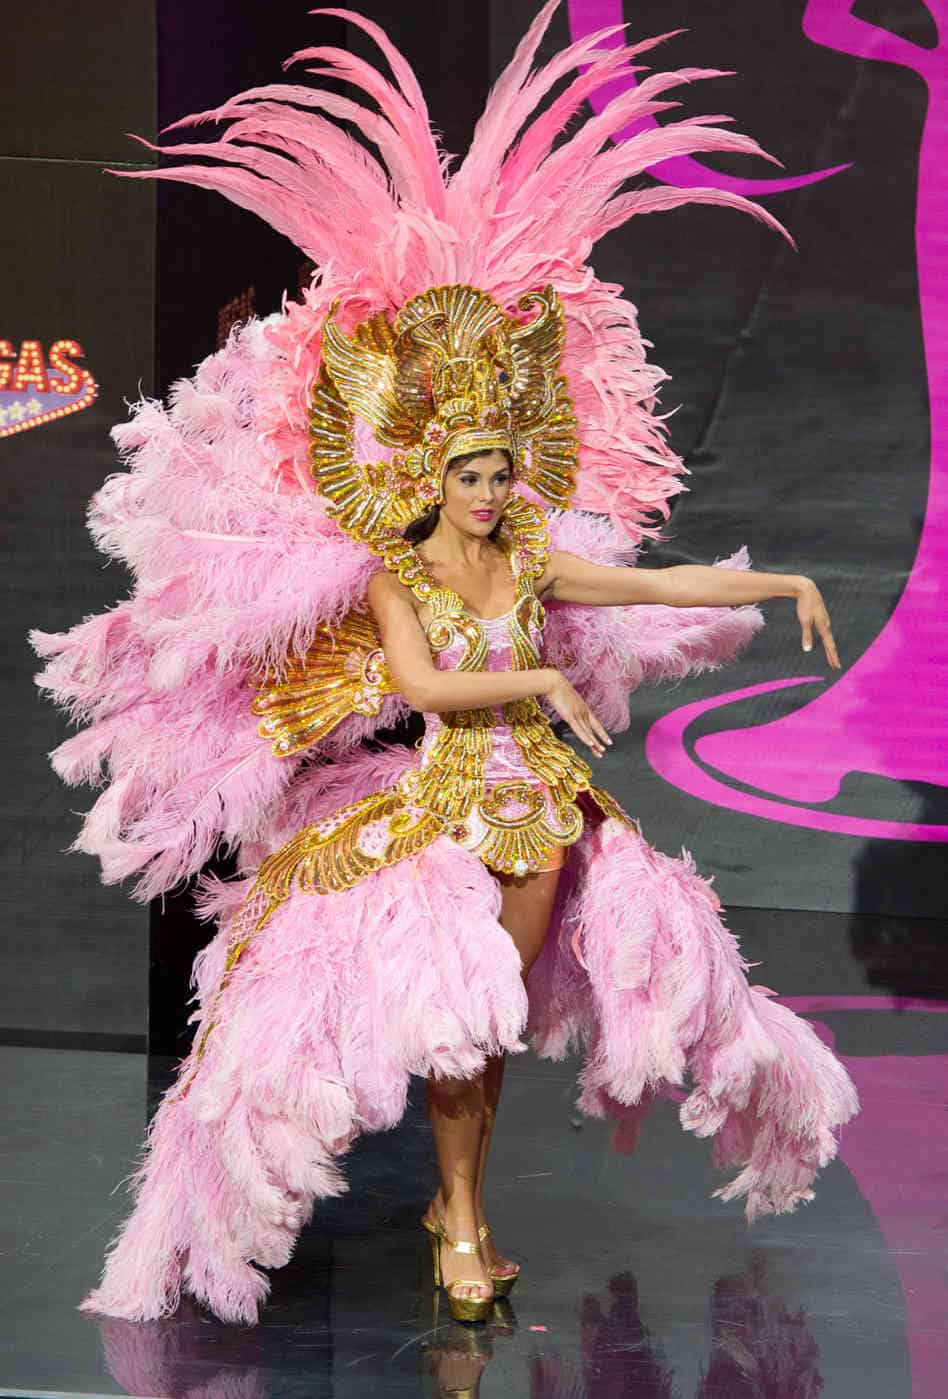 17 Of The Most Incredible Miss Universe Costumes • AwesomeJelly.com